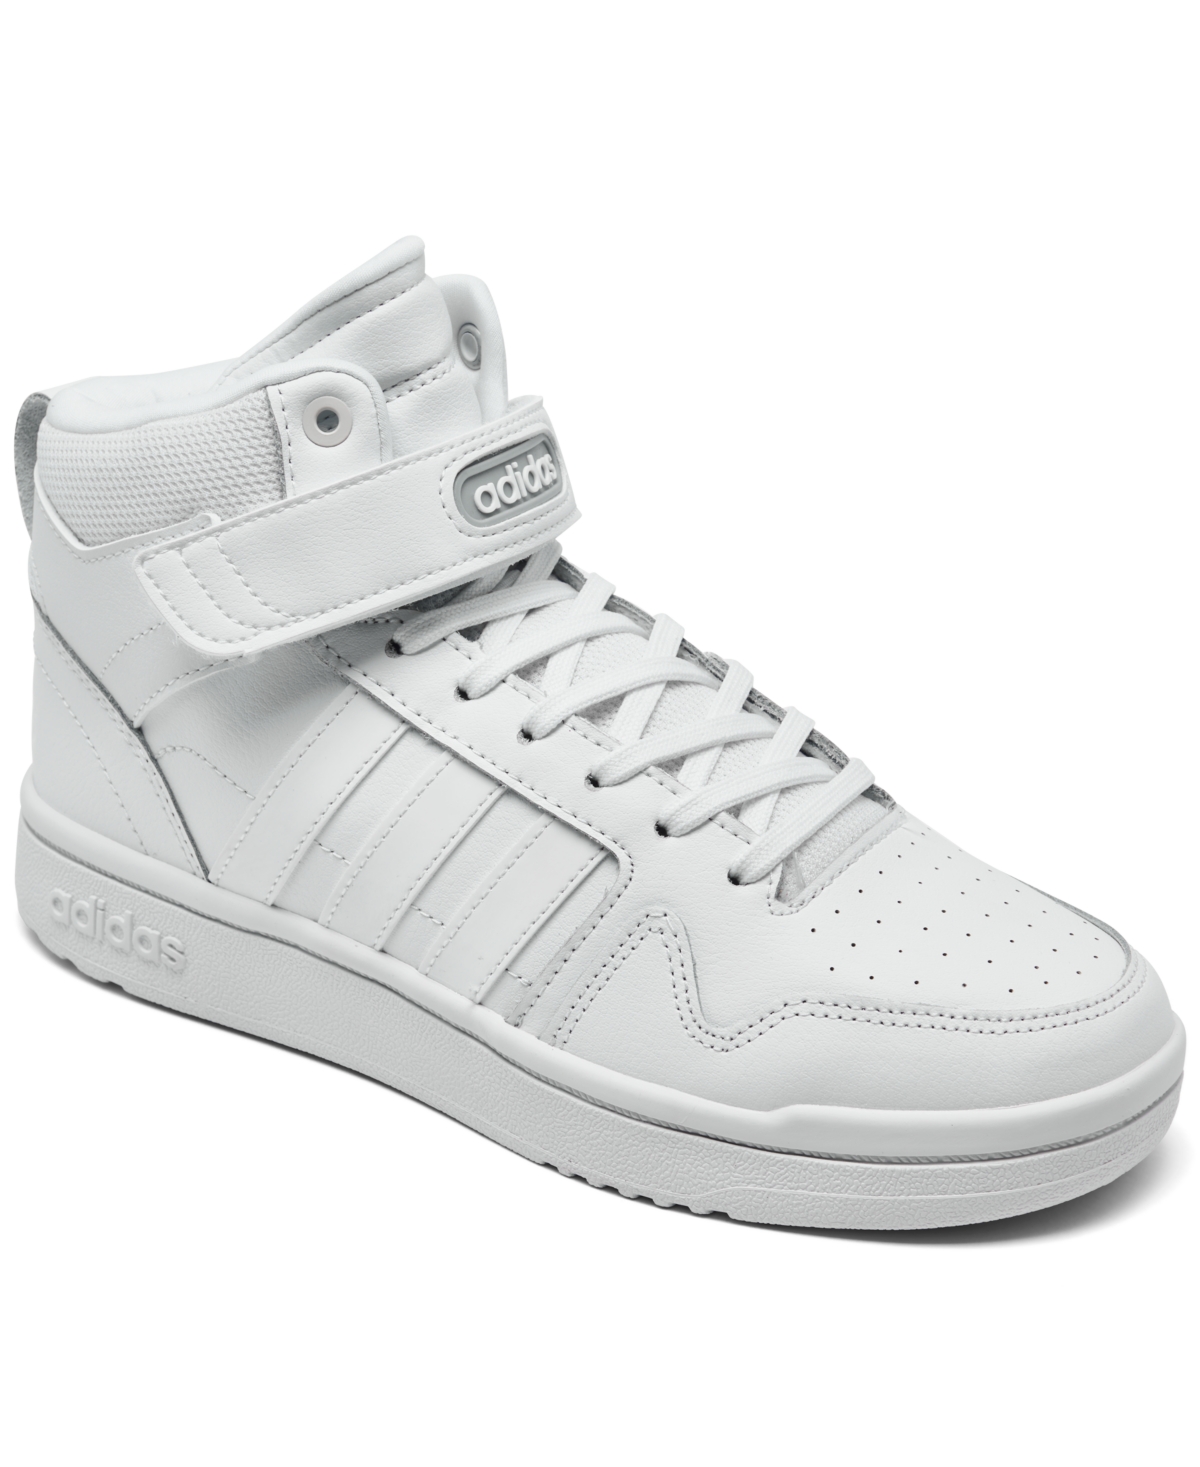 Adidas Women's Post Move Mid Basketball Sneakers from Finish Line from ...